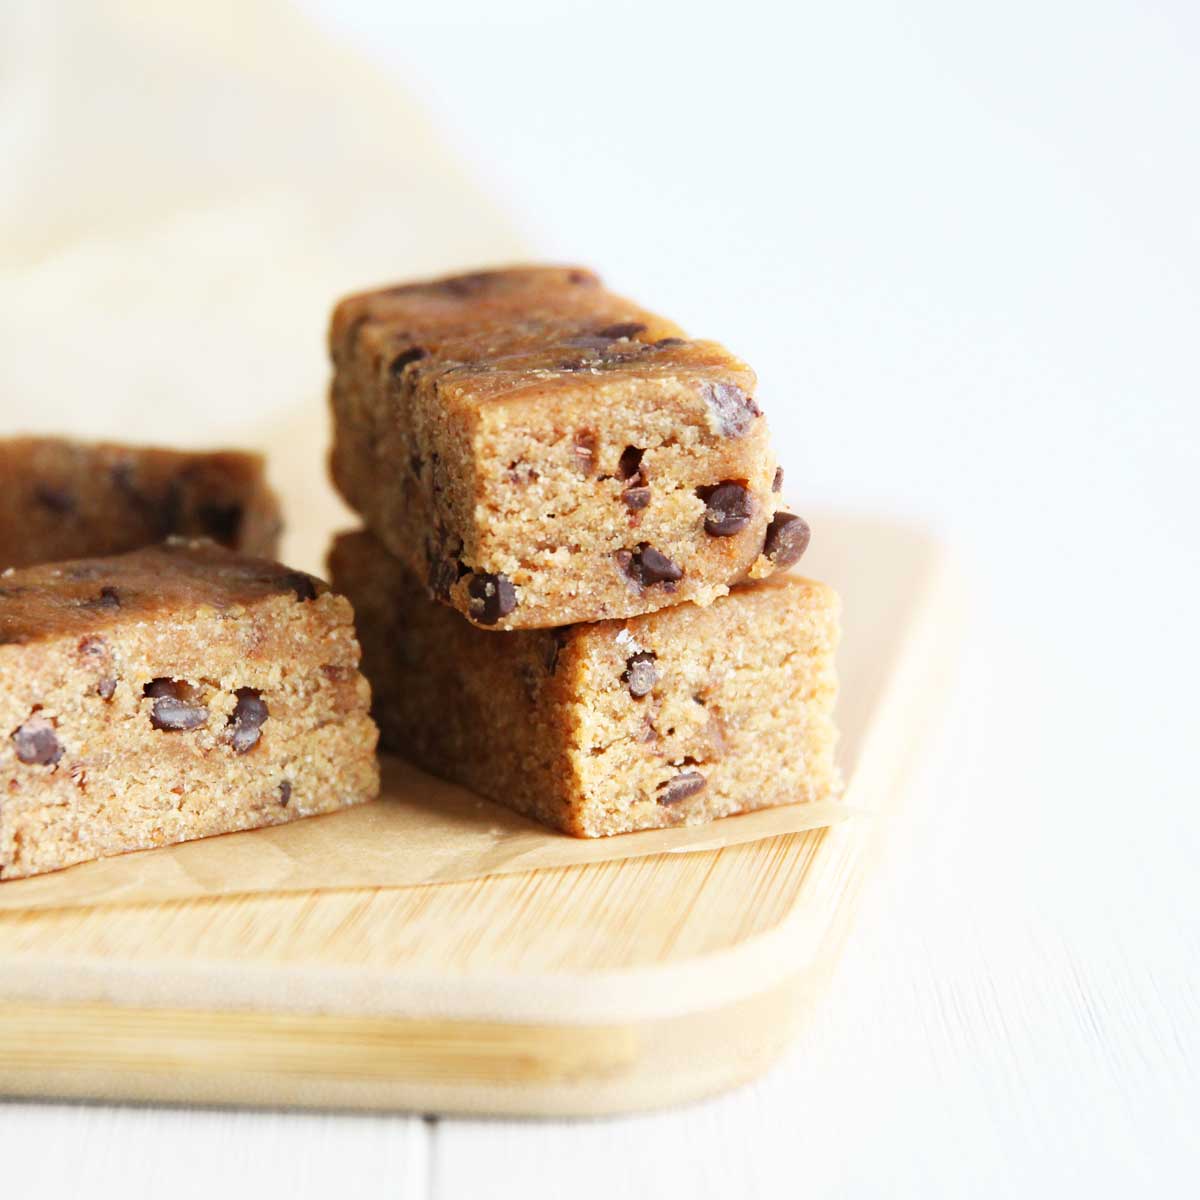 The Best Post-Workout Snack! Almond Butter Chocolate Chip Cookie Dough Collagen Protein Bars - Canned Chickpea Yeast Bread